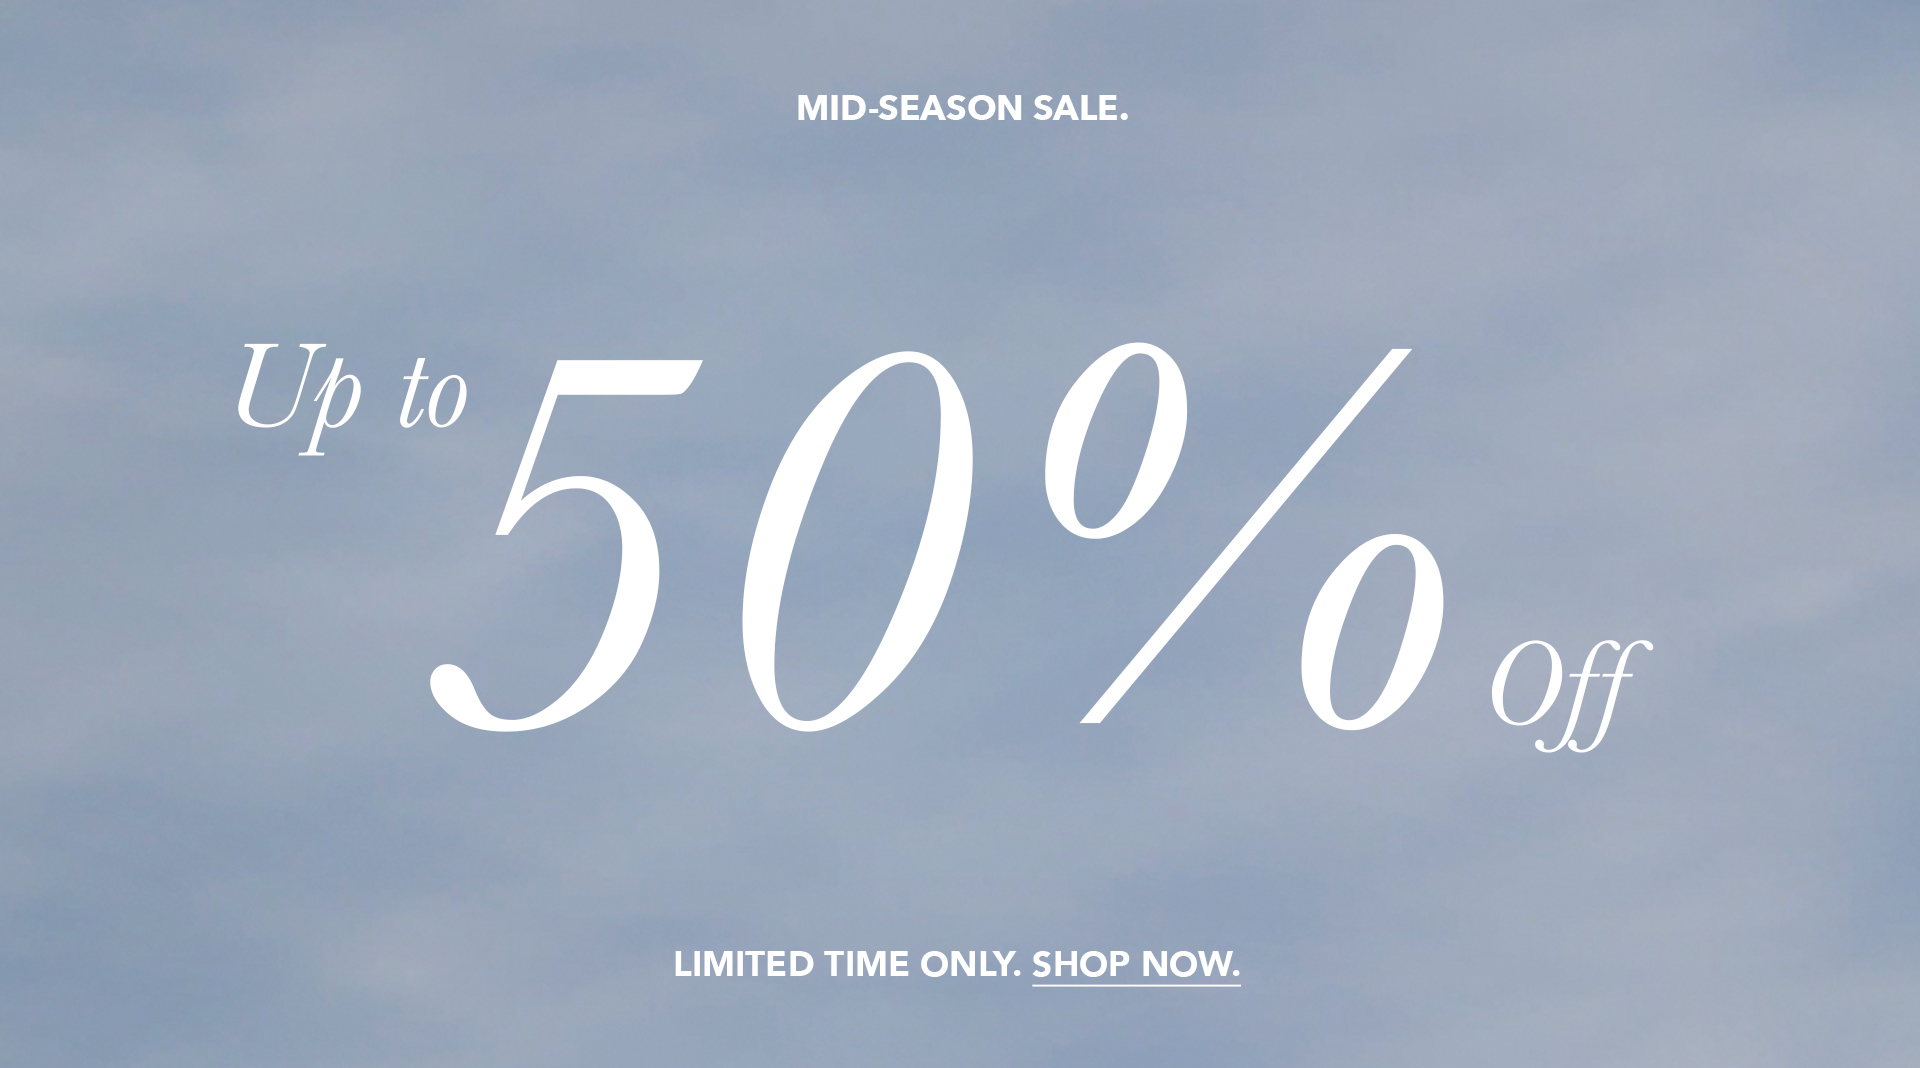 Mid-Season Sale. Up to 50% OFF. Limited Time Only. Shop Now